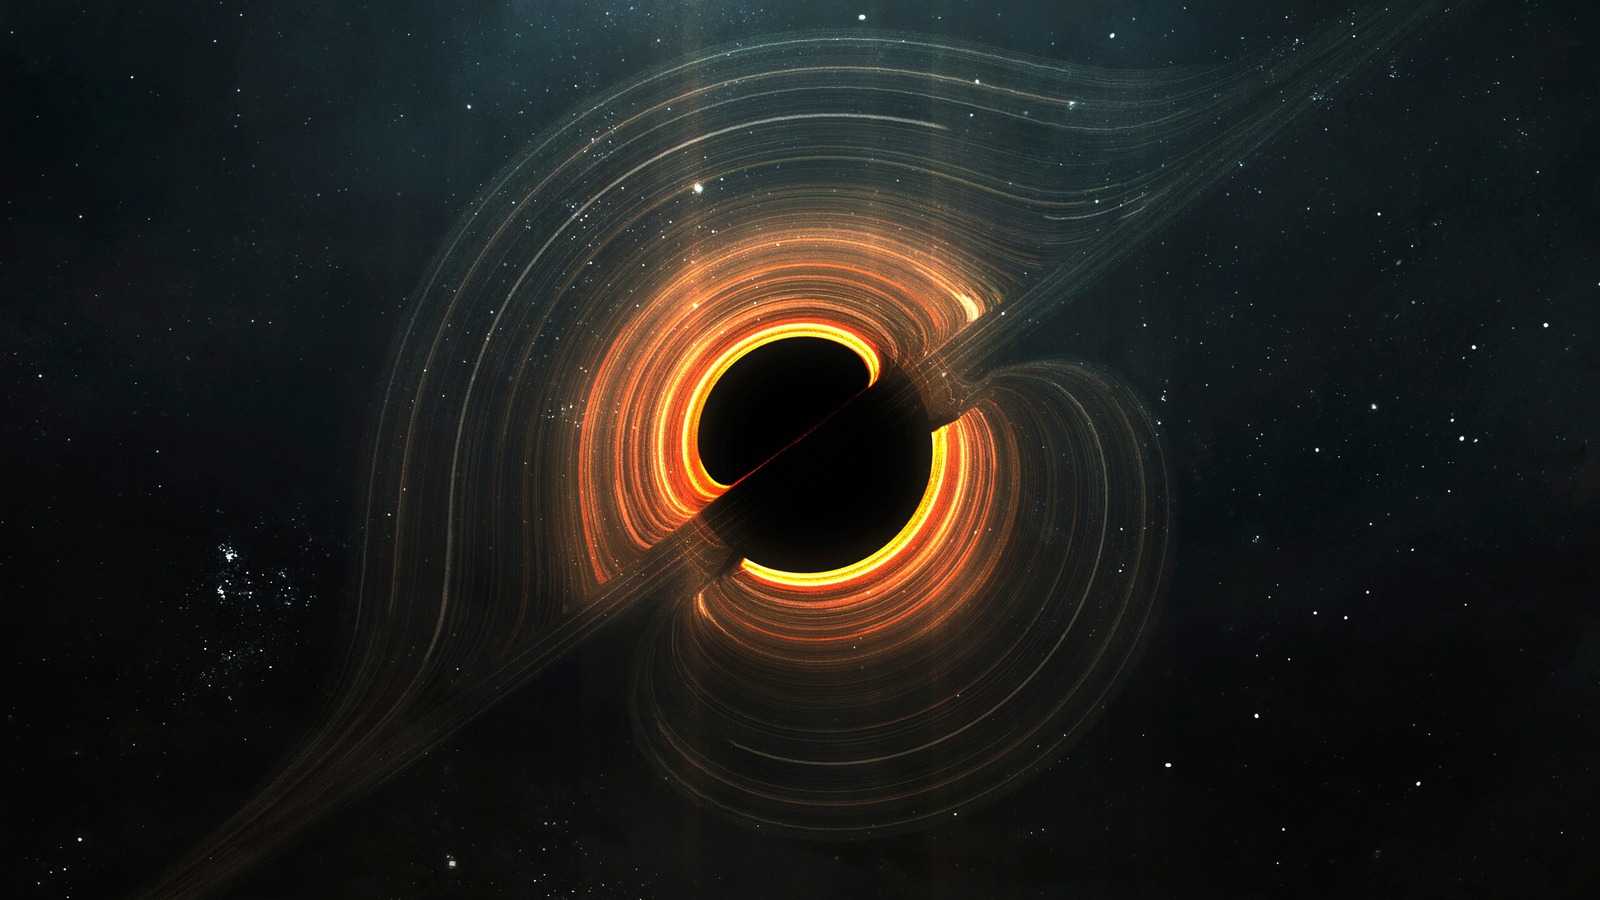 Physicists have figured out how to look for wormholes for time travel and between universes